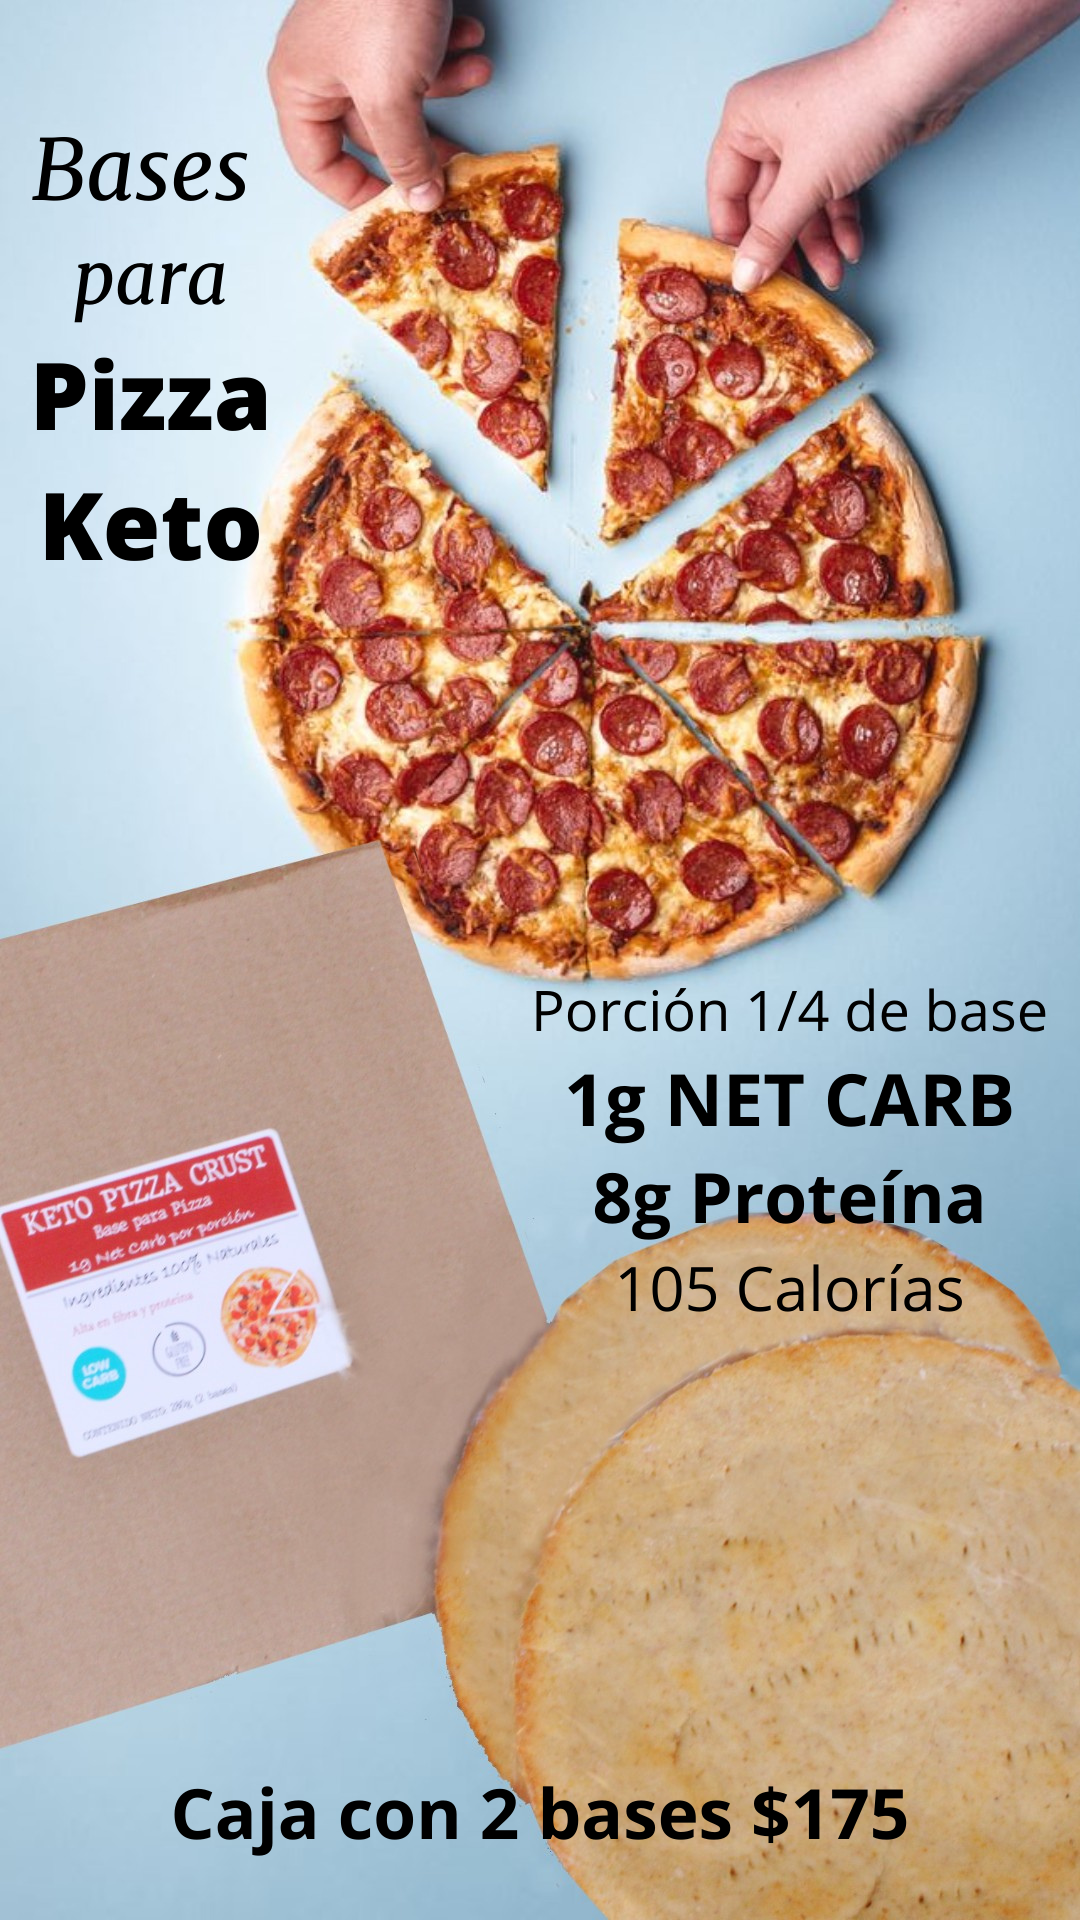 Keto Pizza Bases (Only express shipments REQUIRE REFRIGERATION)